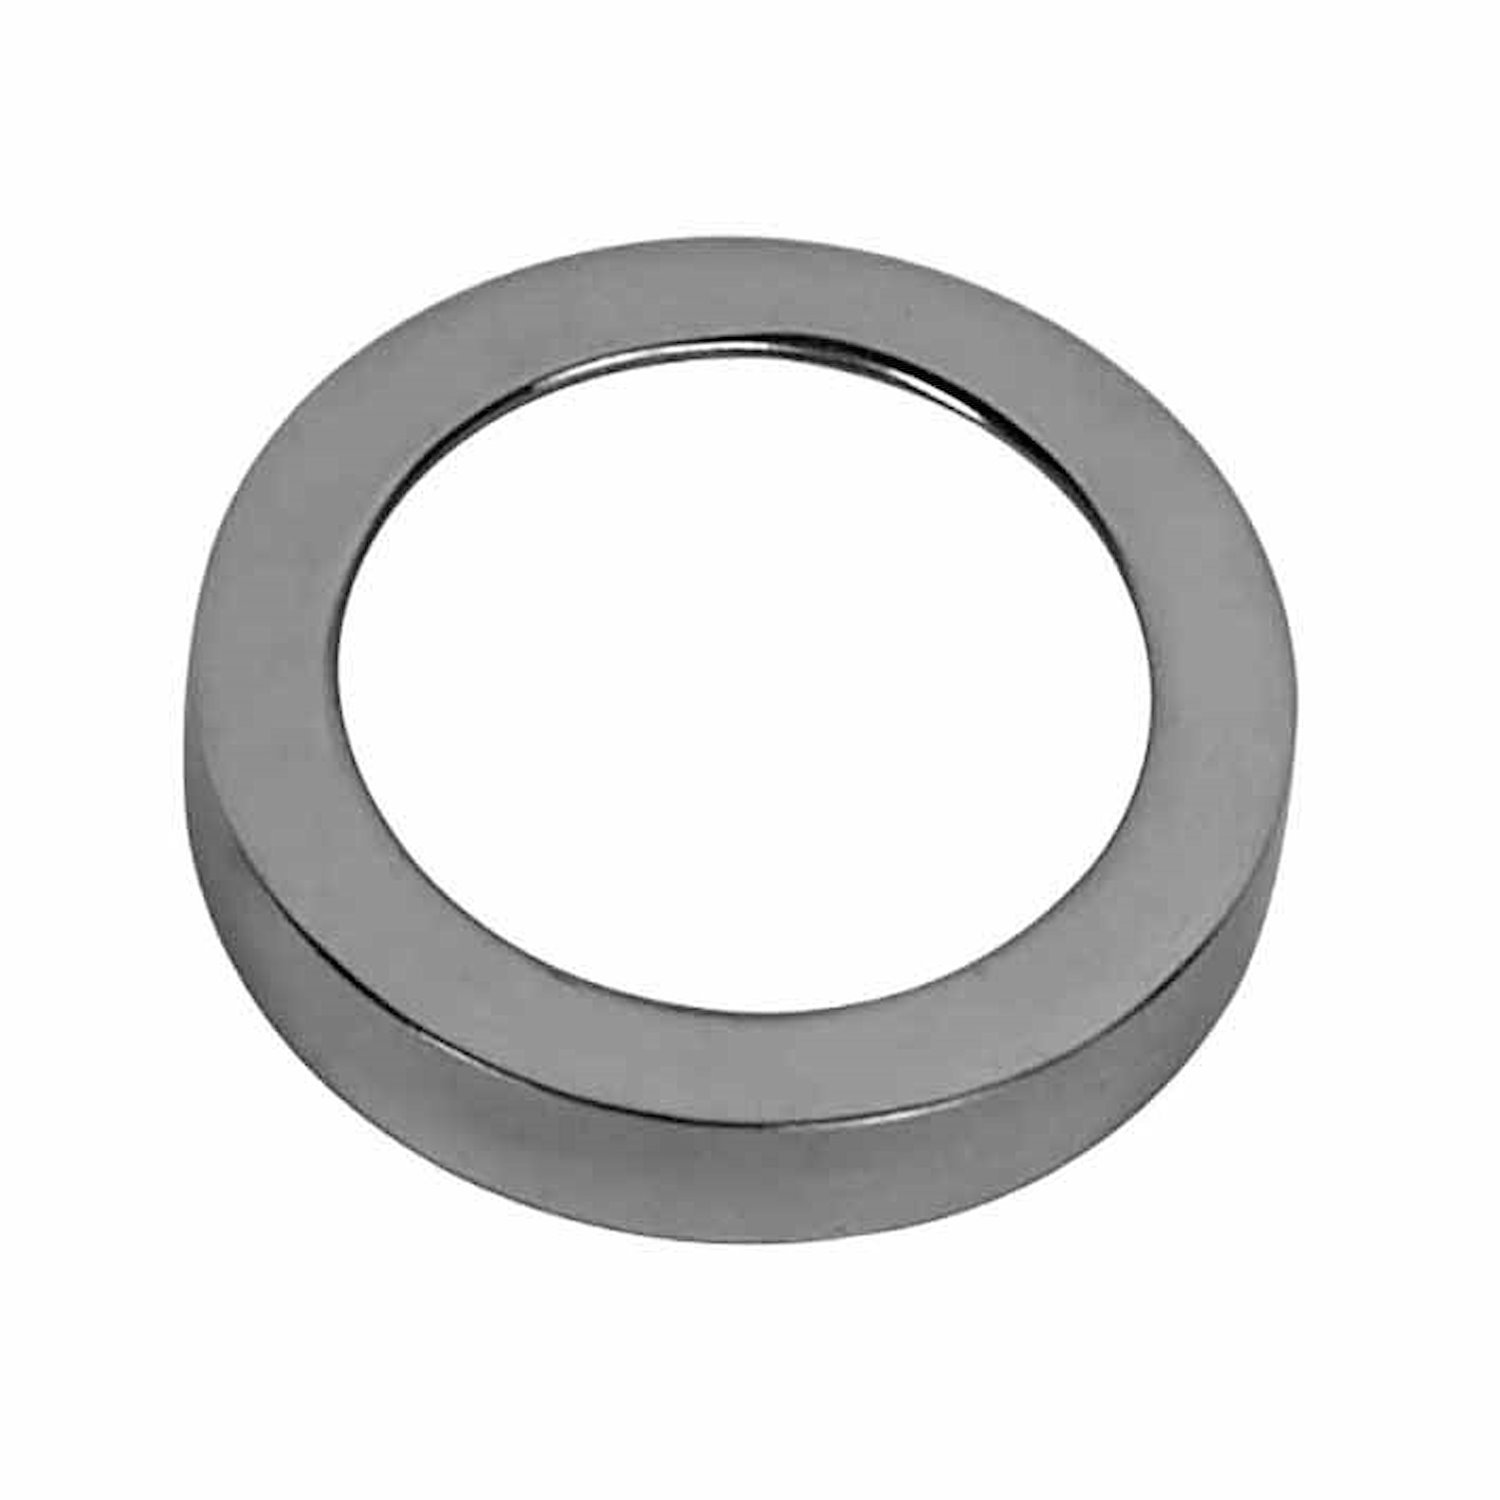 Rubber Breather Grommet - 1 Id - 1 1/4 Od - 1/4 Groove